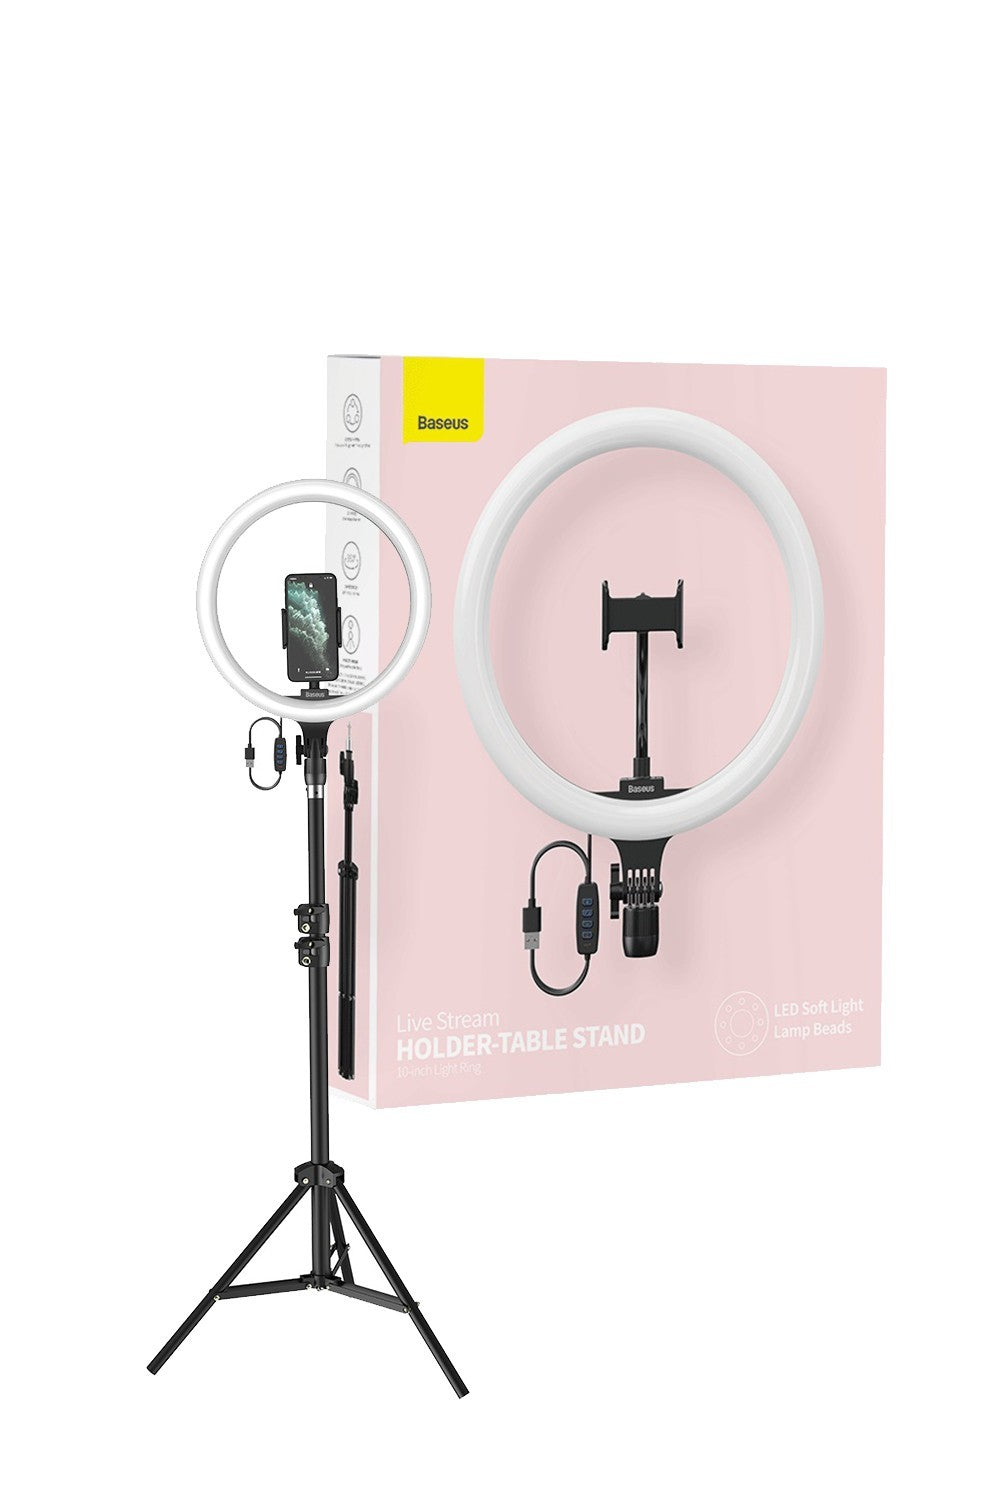 Baseus Live Stream Holder Tripod Stand With 12 Inch Ring Light